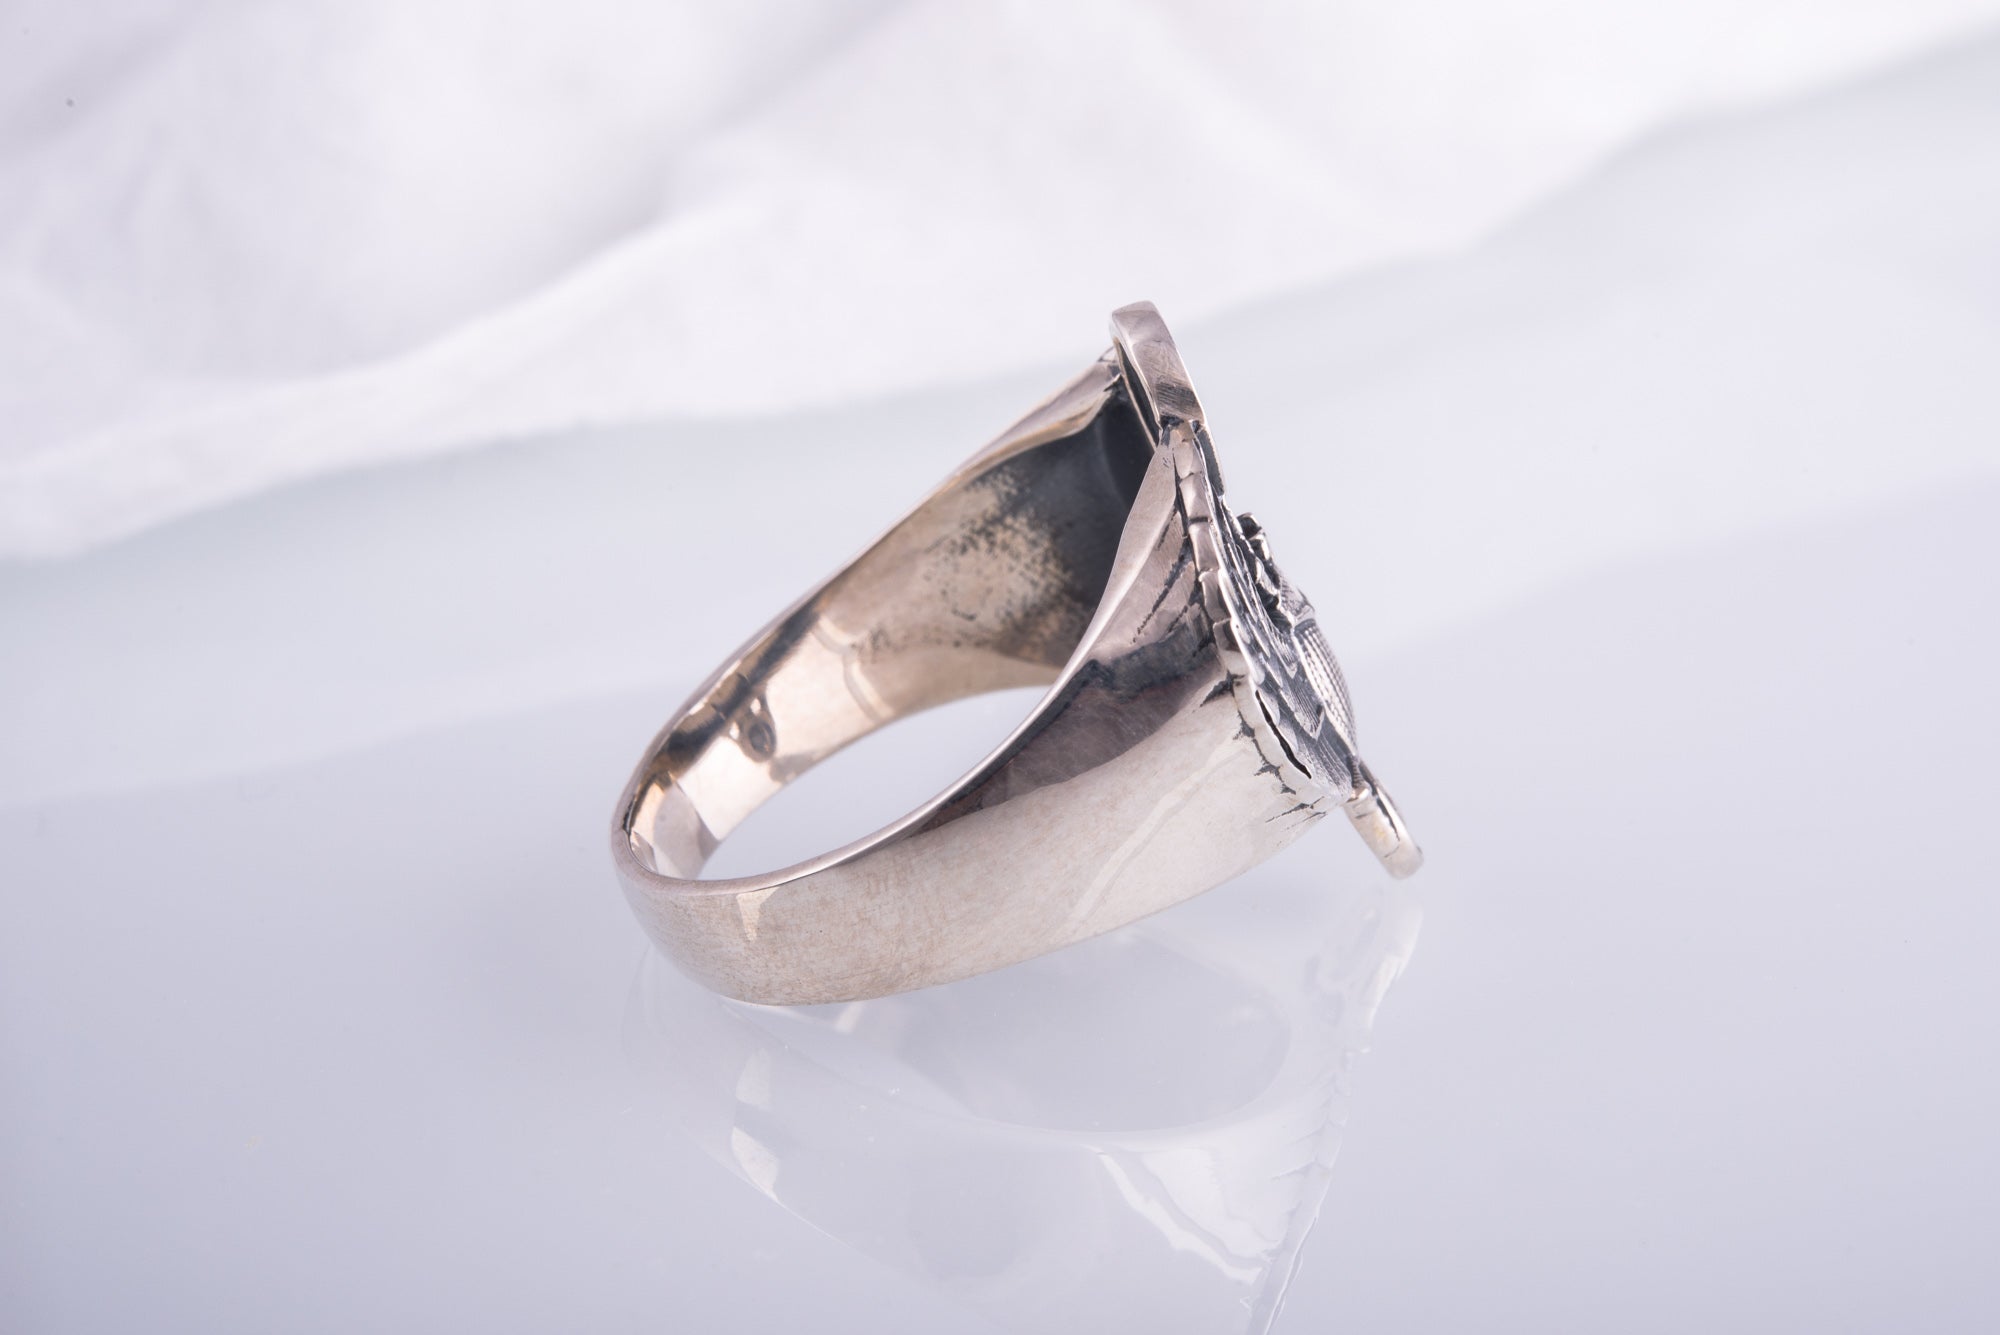 925 Silver Egypt ring with Scarabeus and Horus wings, Unique Handmade Jewelry - vikingworkshop